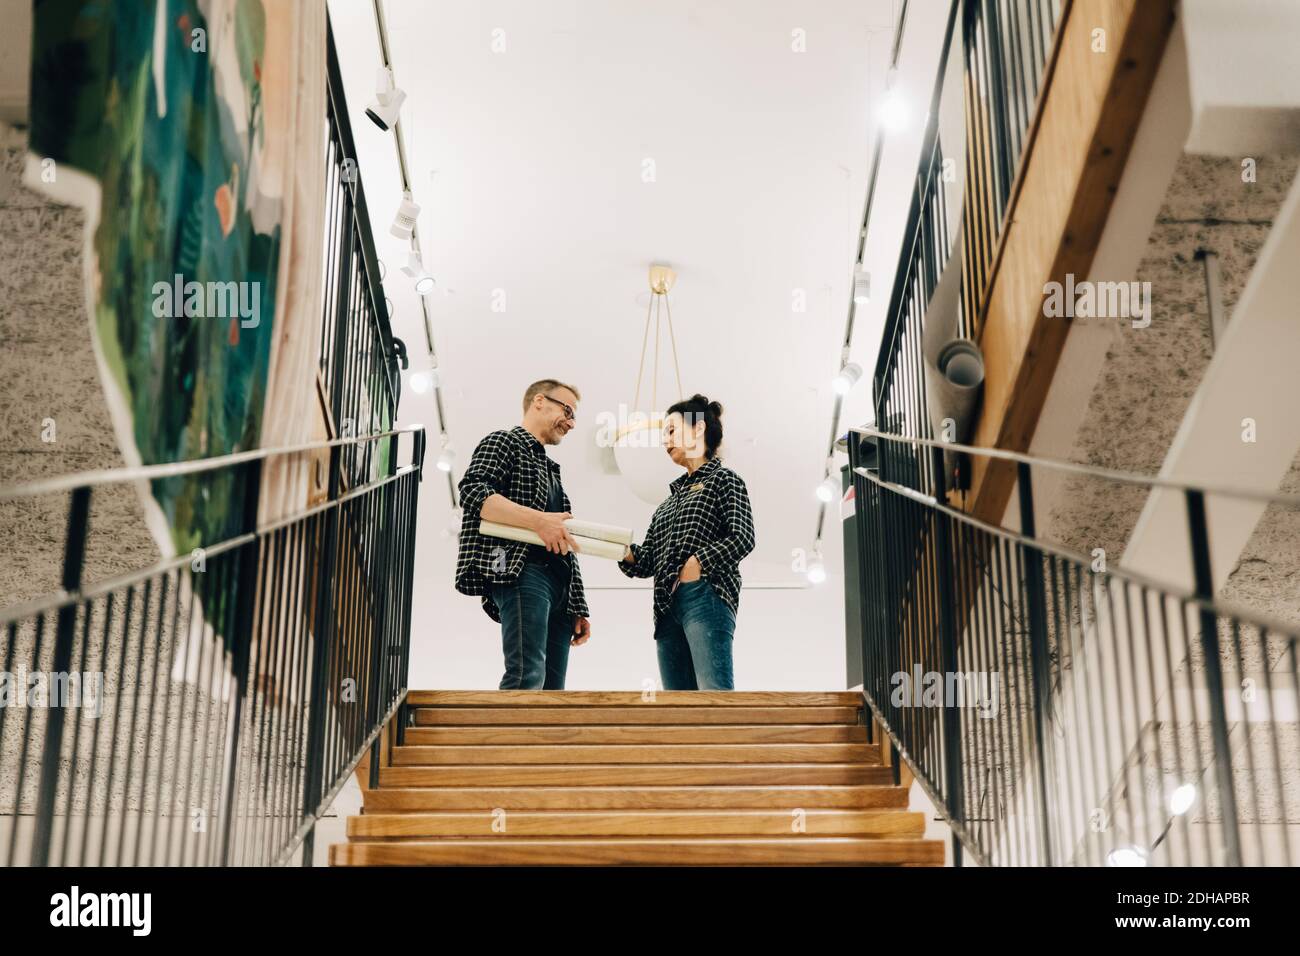 Low angle view of coworkers standing on top of staircase in store Stock Photo